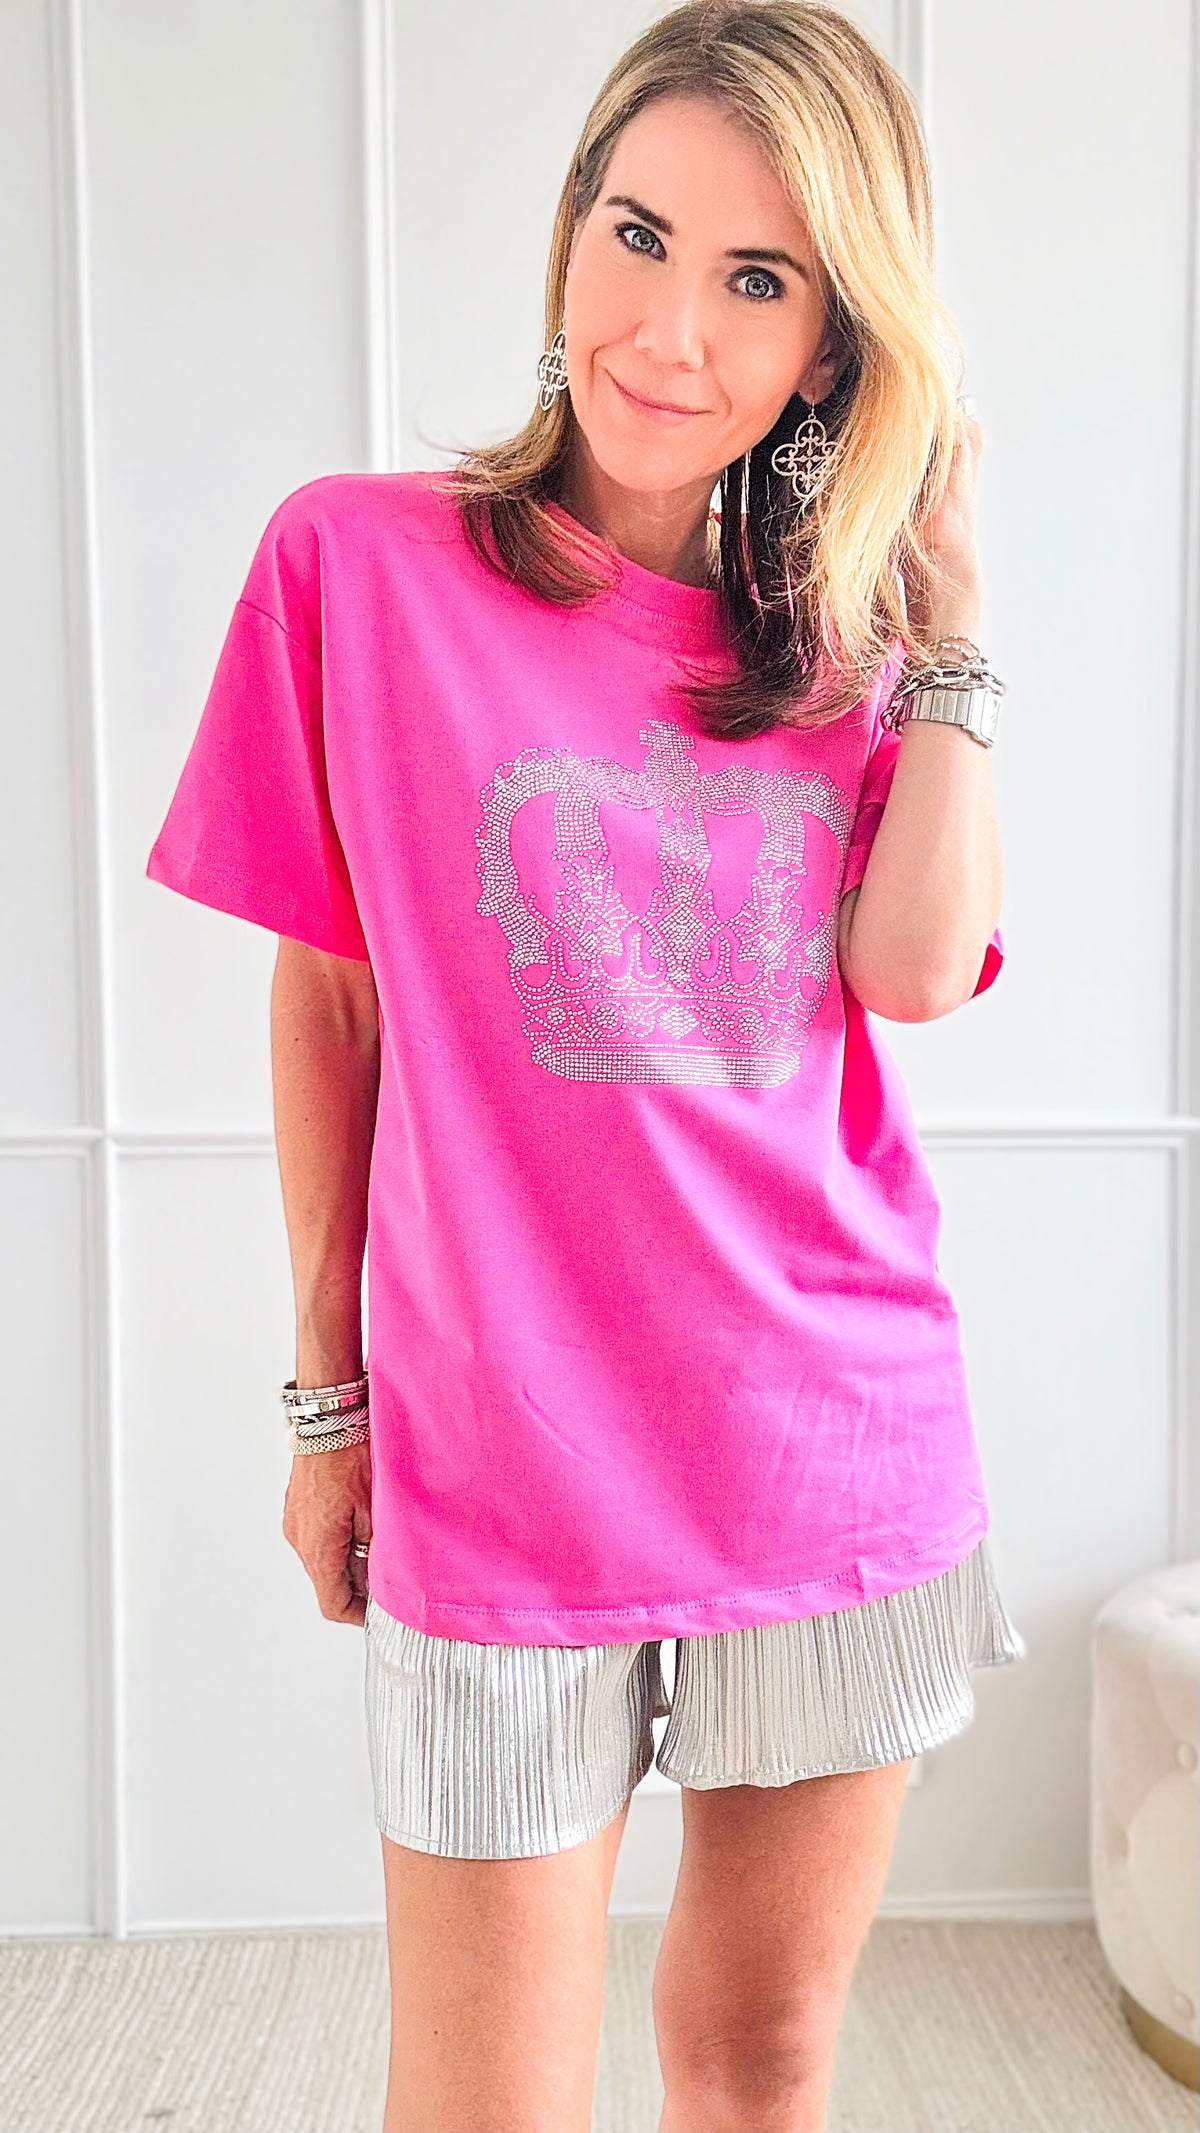 CUSTOM CB Royal Crown Tee - Pink-110 Short Sleeve Tops-Holly / in2you-Coastal Bloom Boutique, find the trendiest versions of the popular styles and looks Located in Indialantic, FL